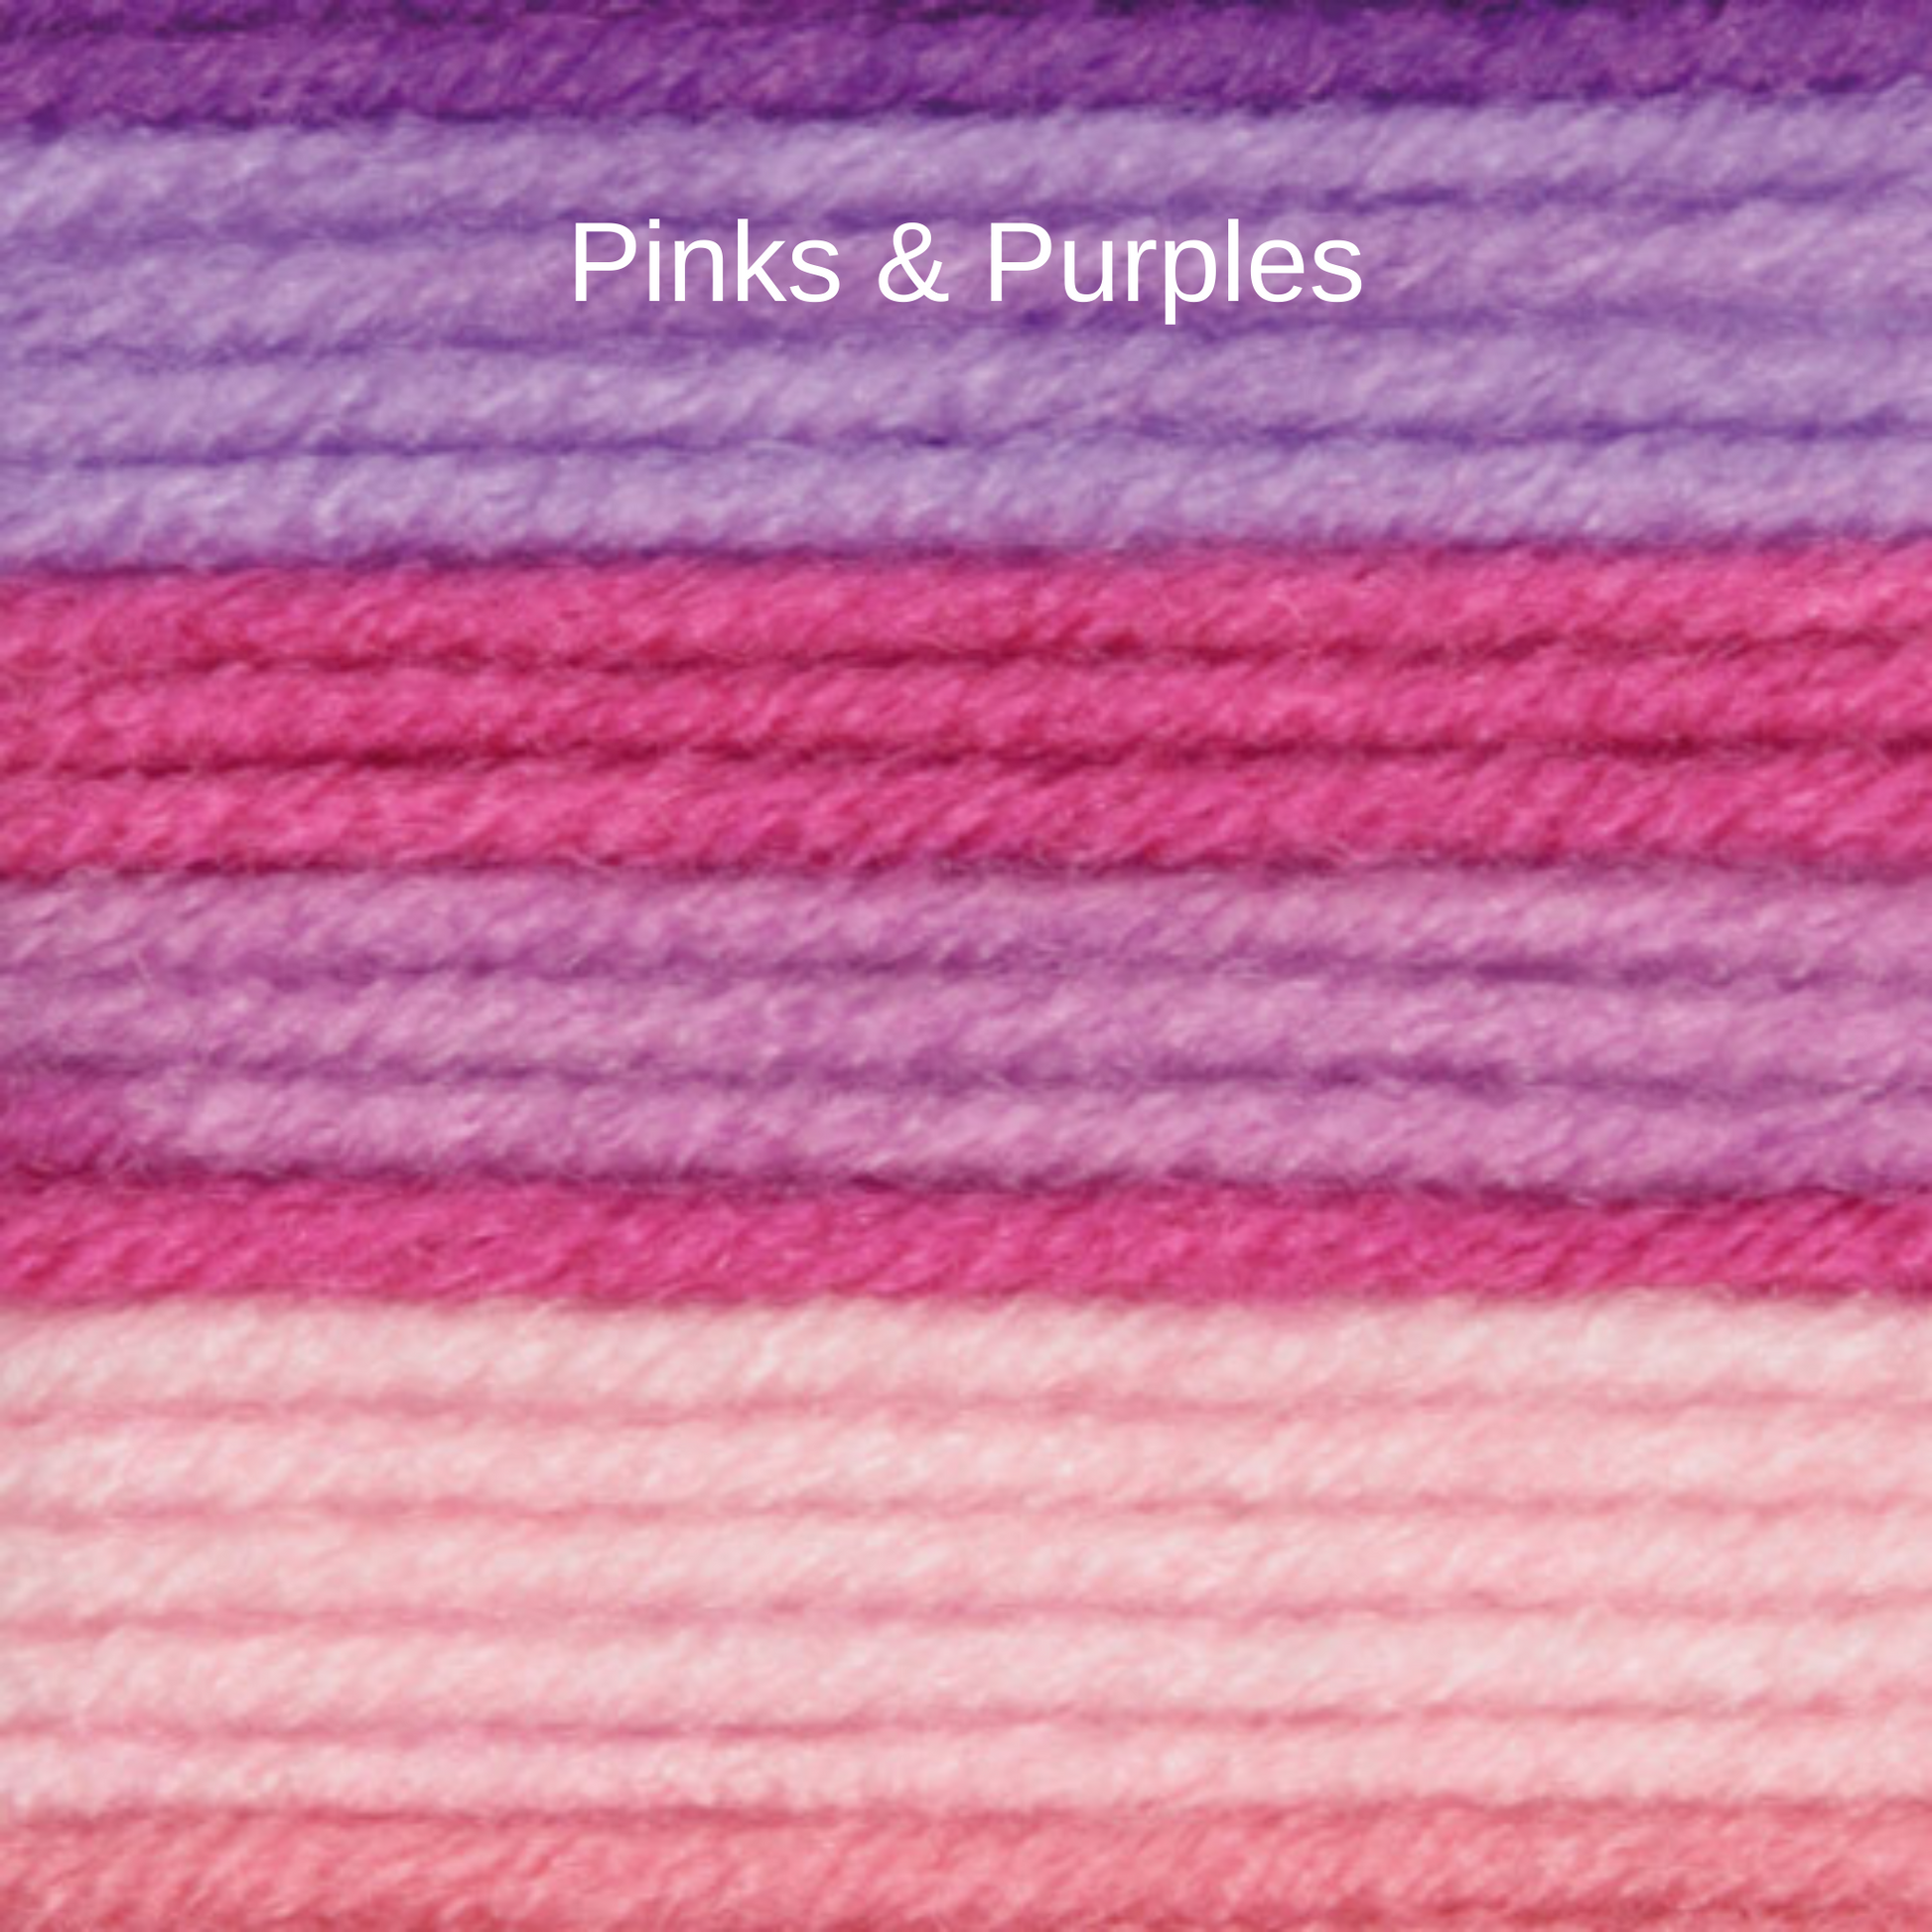 Colours in Pinks & Purples Wool option - dark and light purple, light pink and dark pink